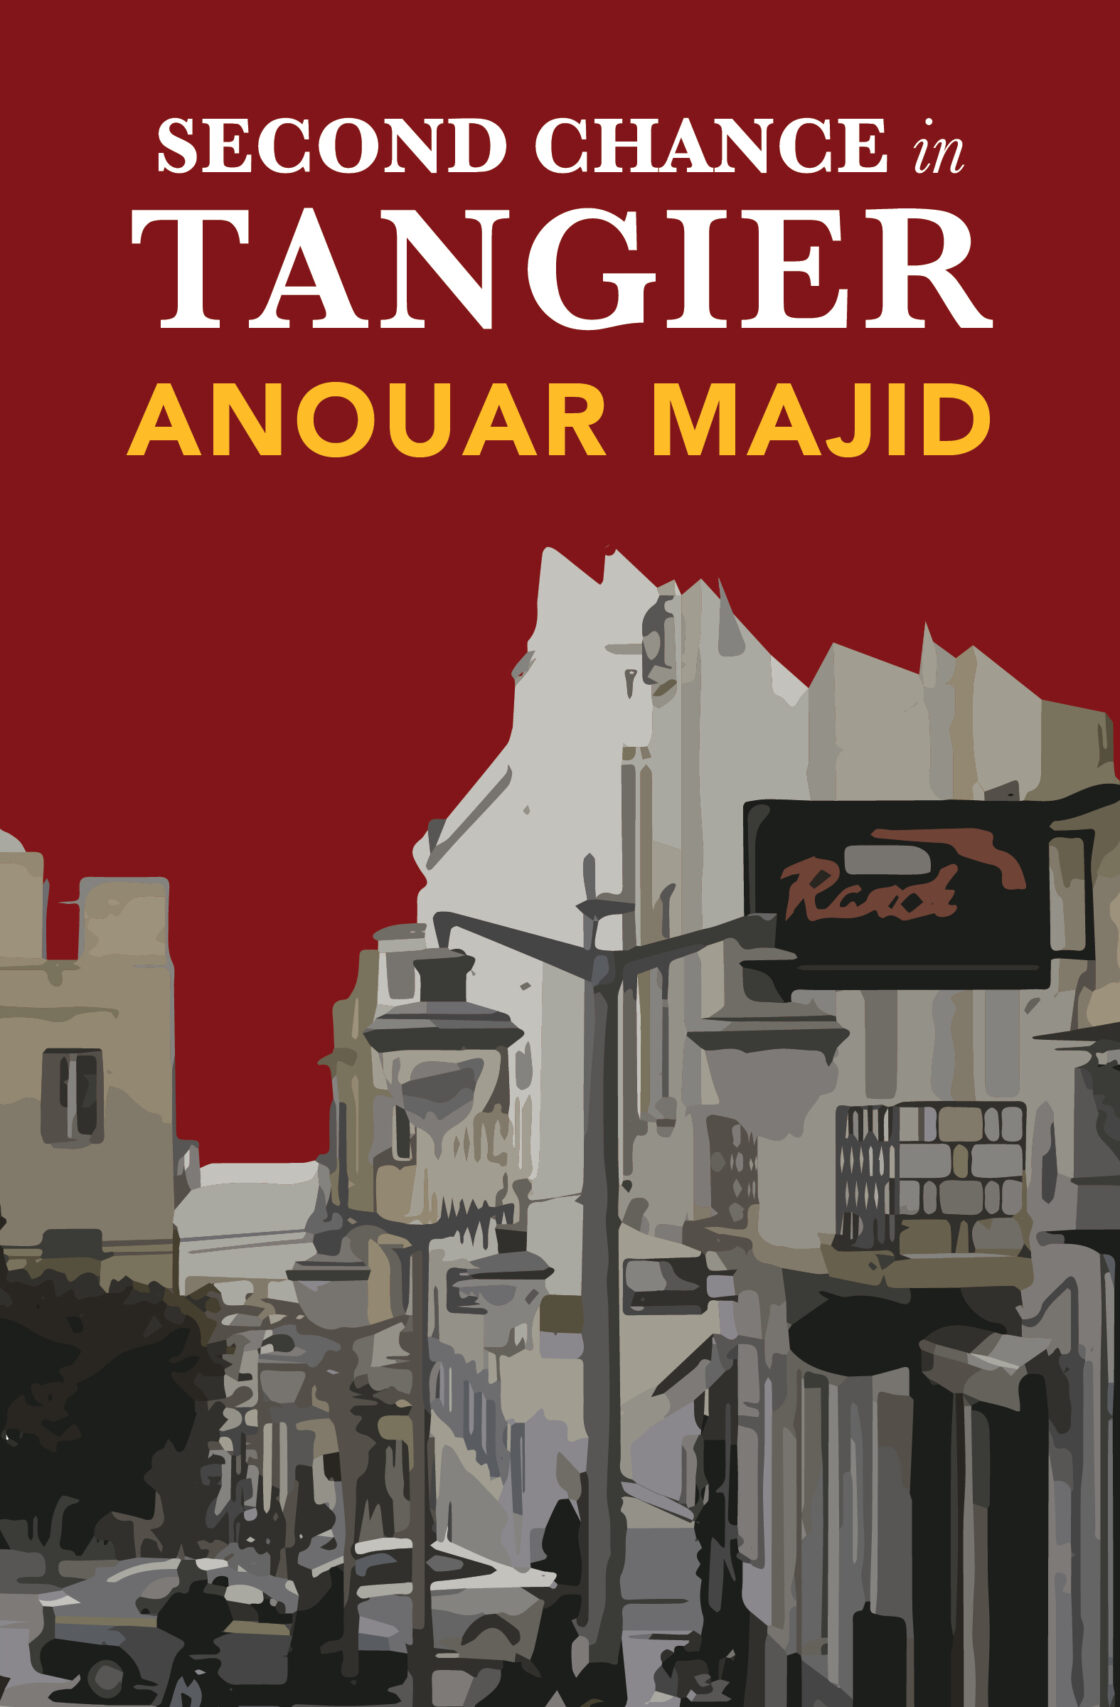 Second Chance in Tangier, published in 2020